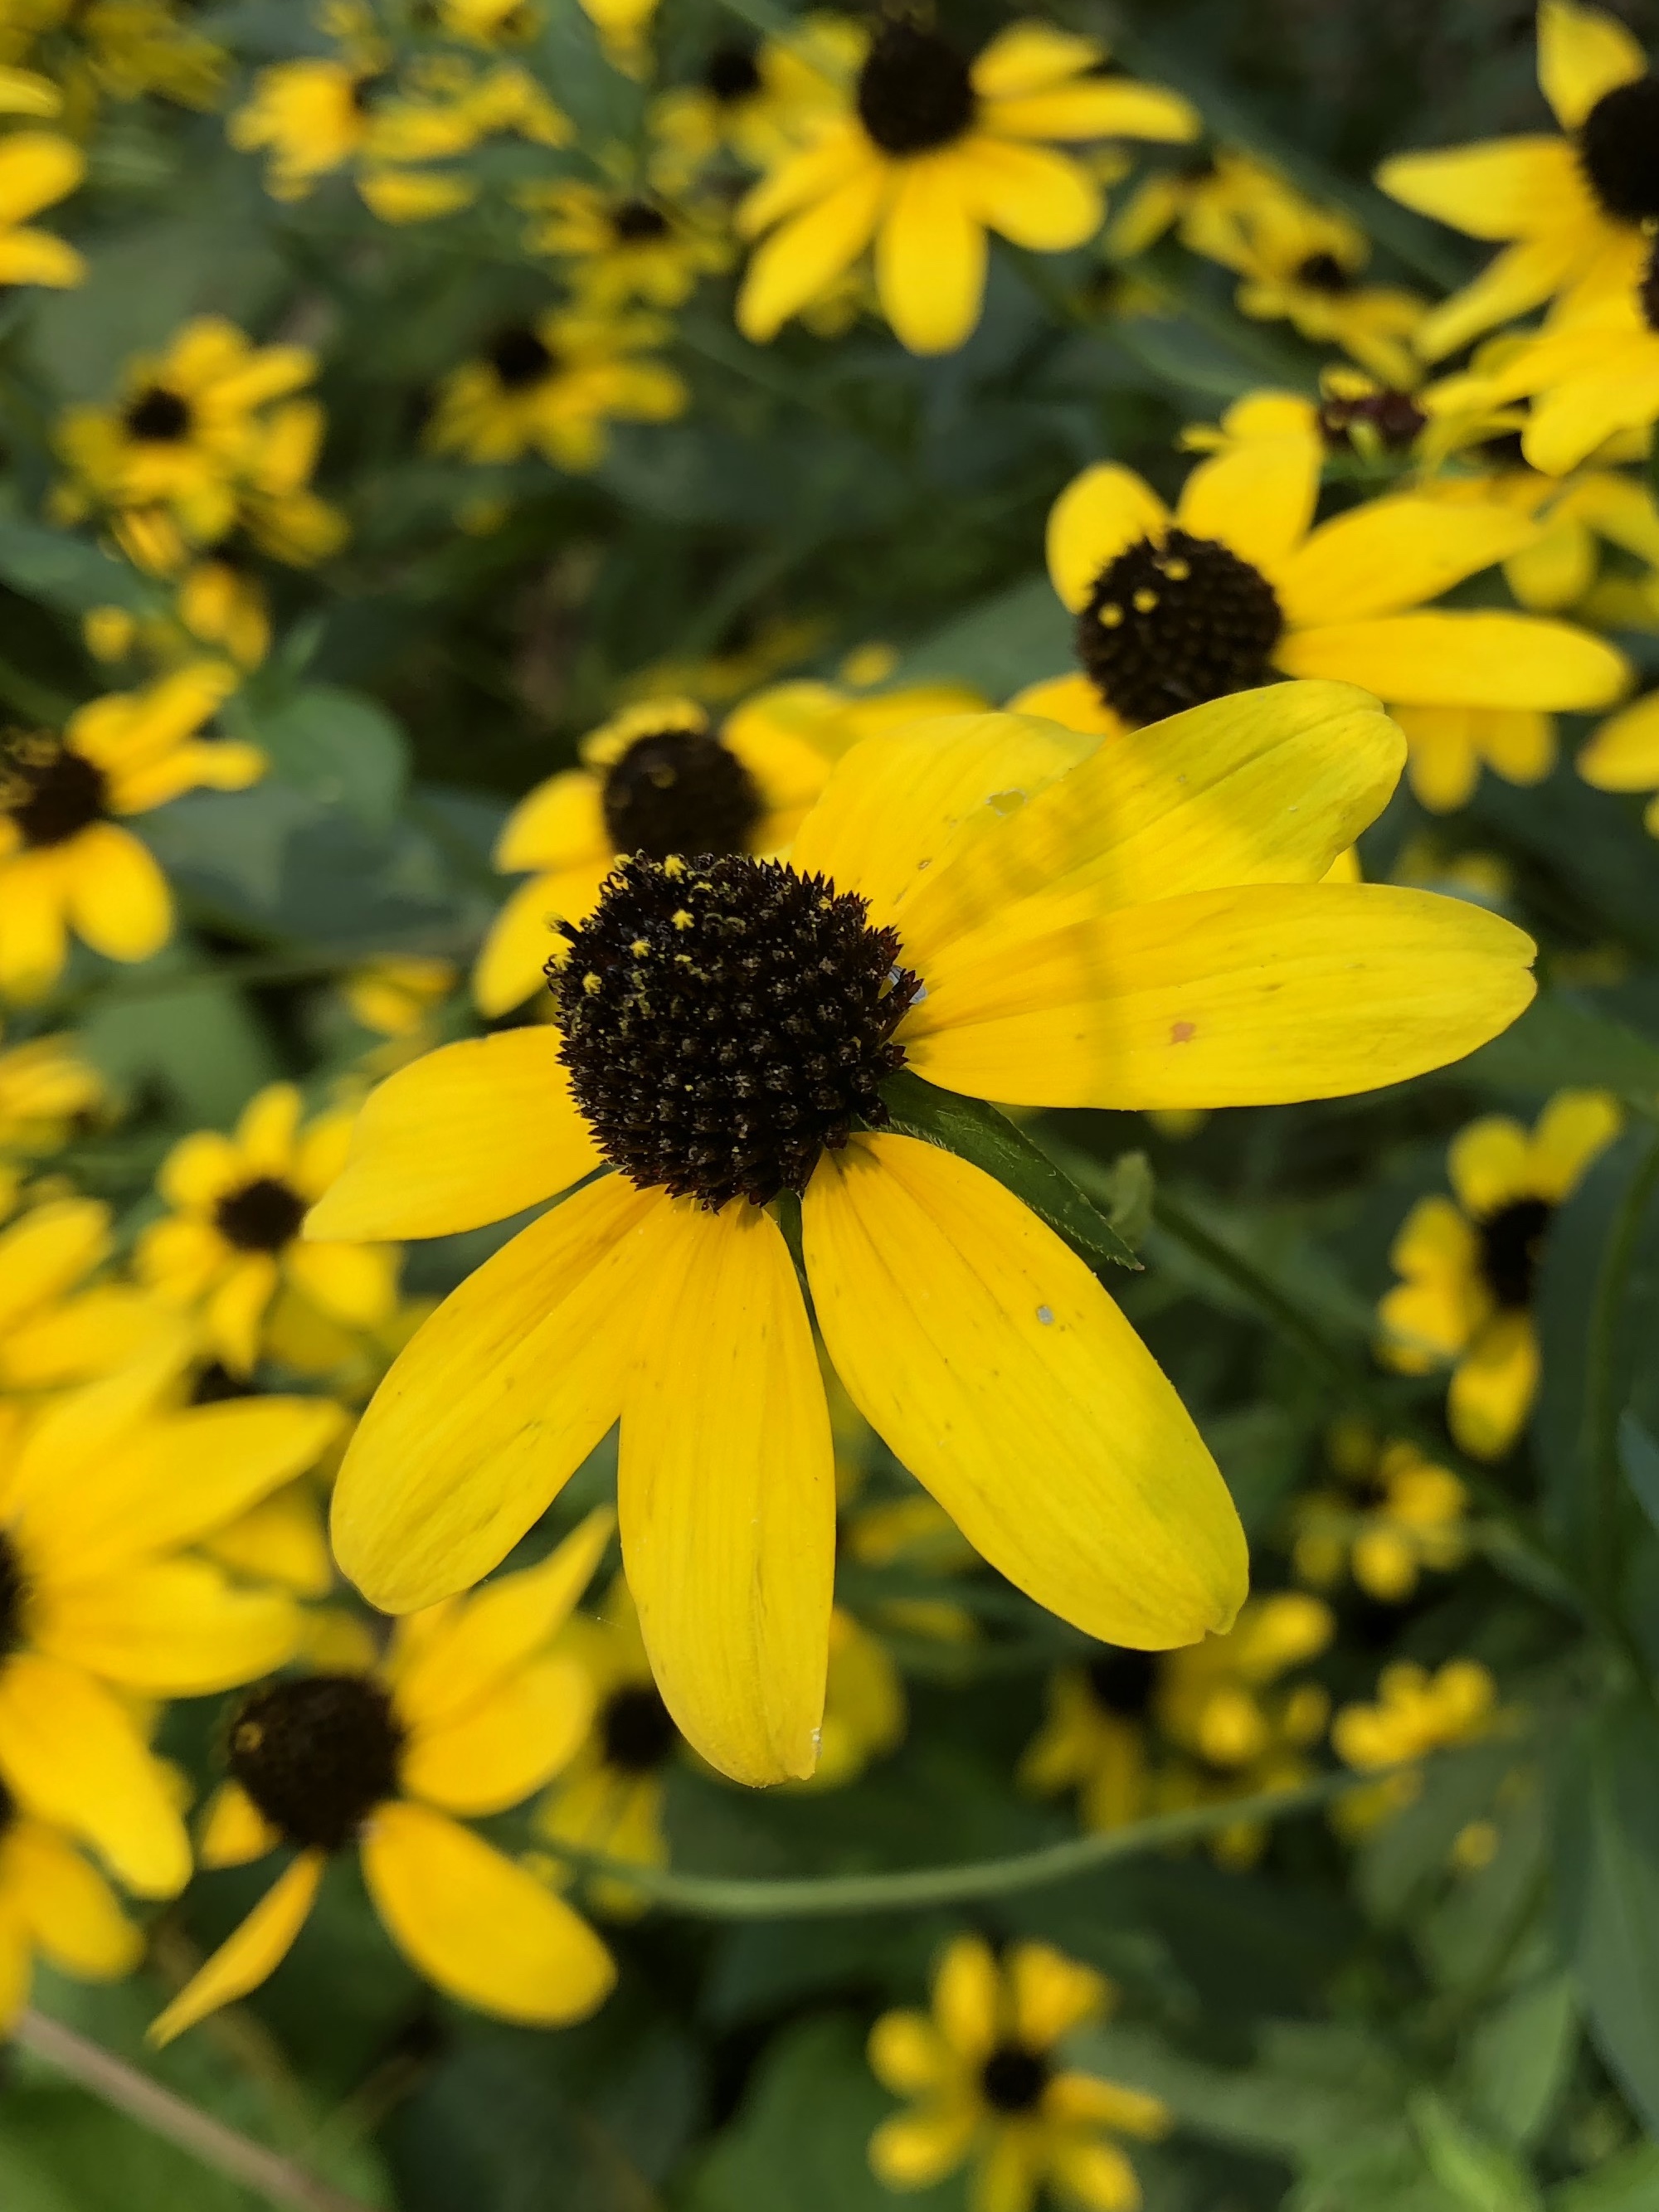 Brown-eyed Susan on bike path near Commonwealth Avenue in Madison, Wisconsin on September 12, 2018.